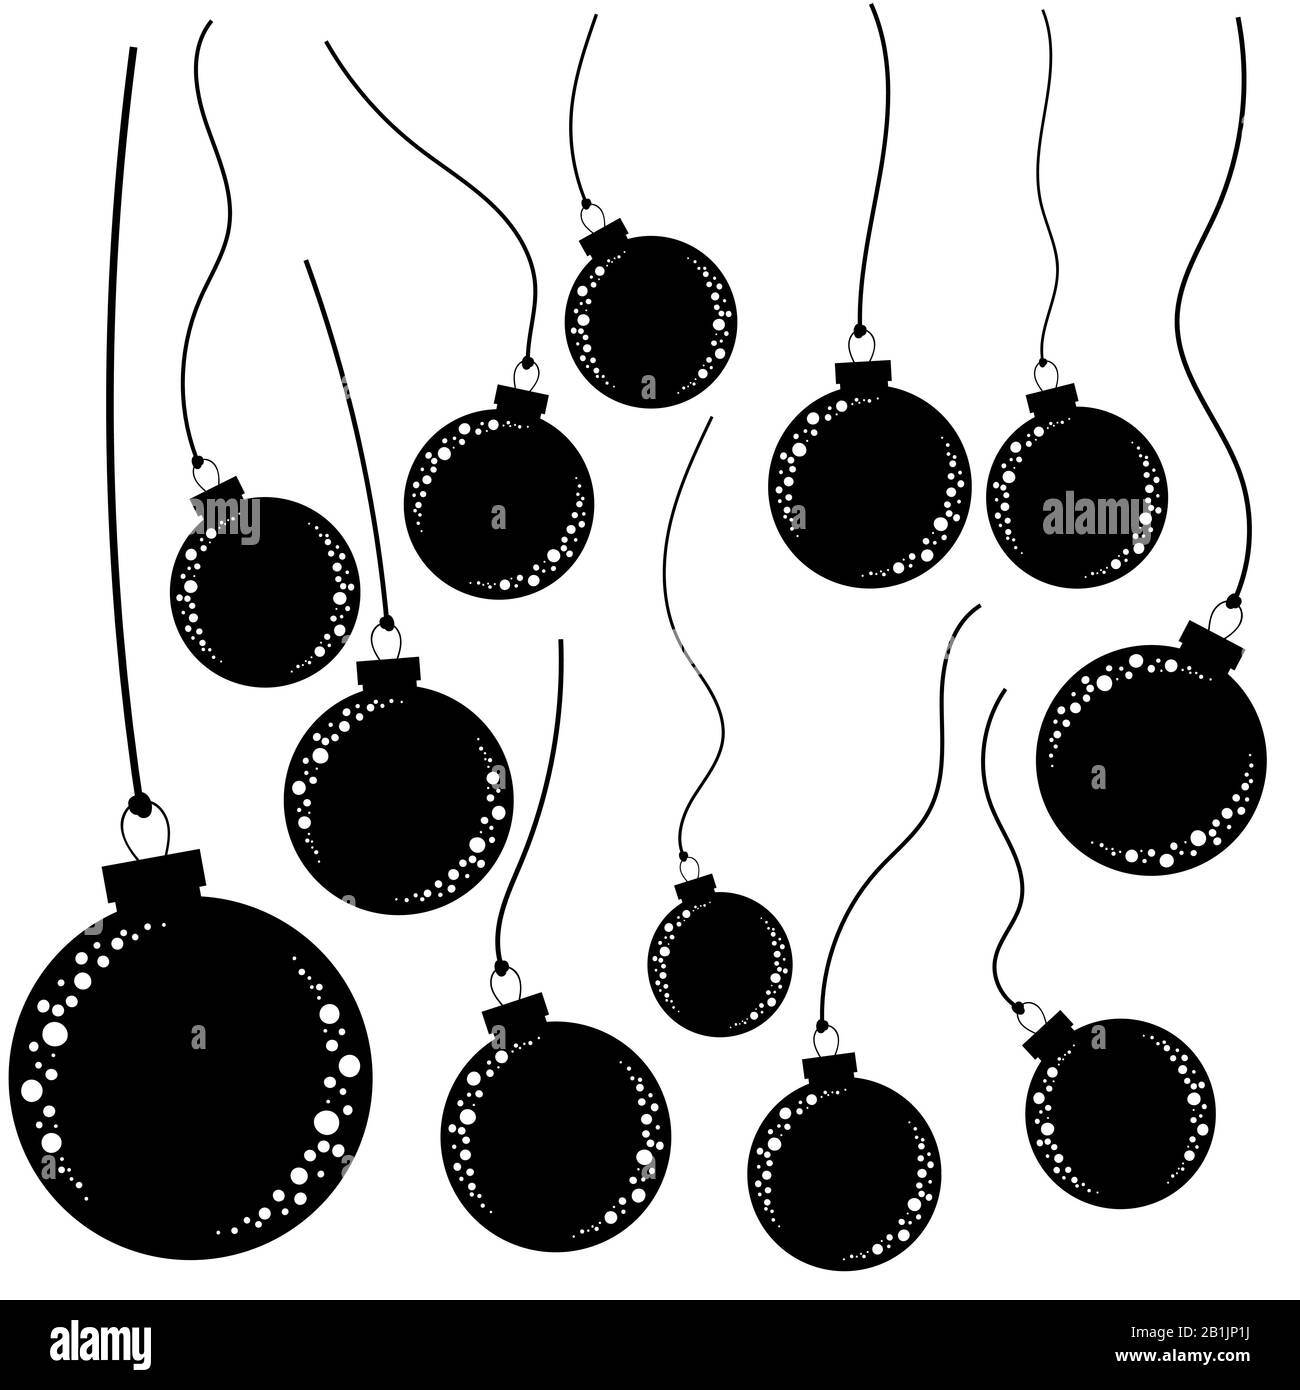 Set of Christmas balls falling down on the ropes. Flat black isolated silhouettes. Stock Vector